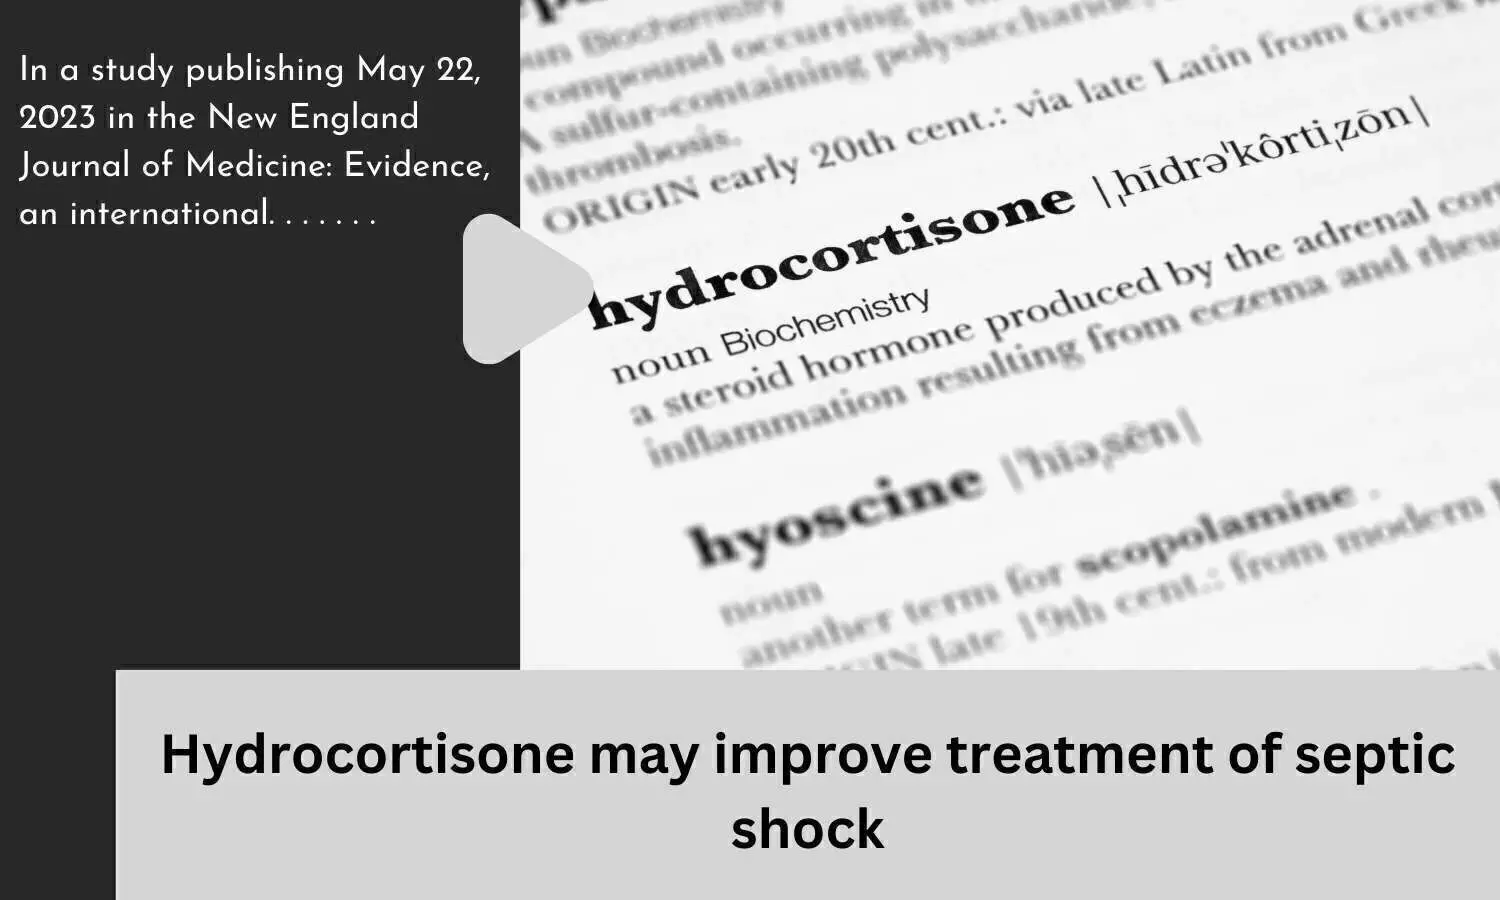 Hydrocortisone may improve treatment of septic shock